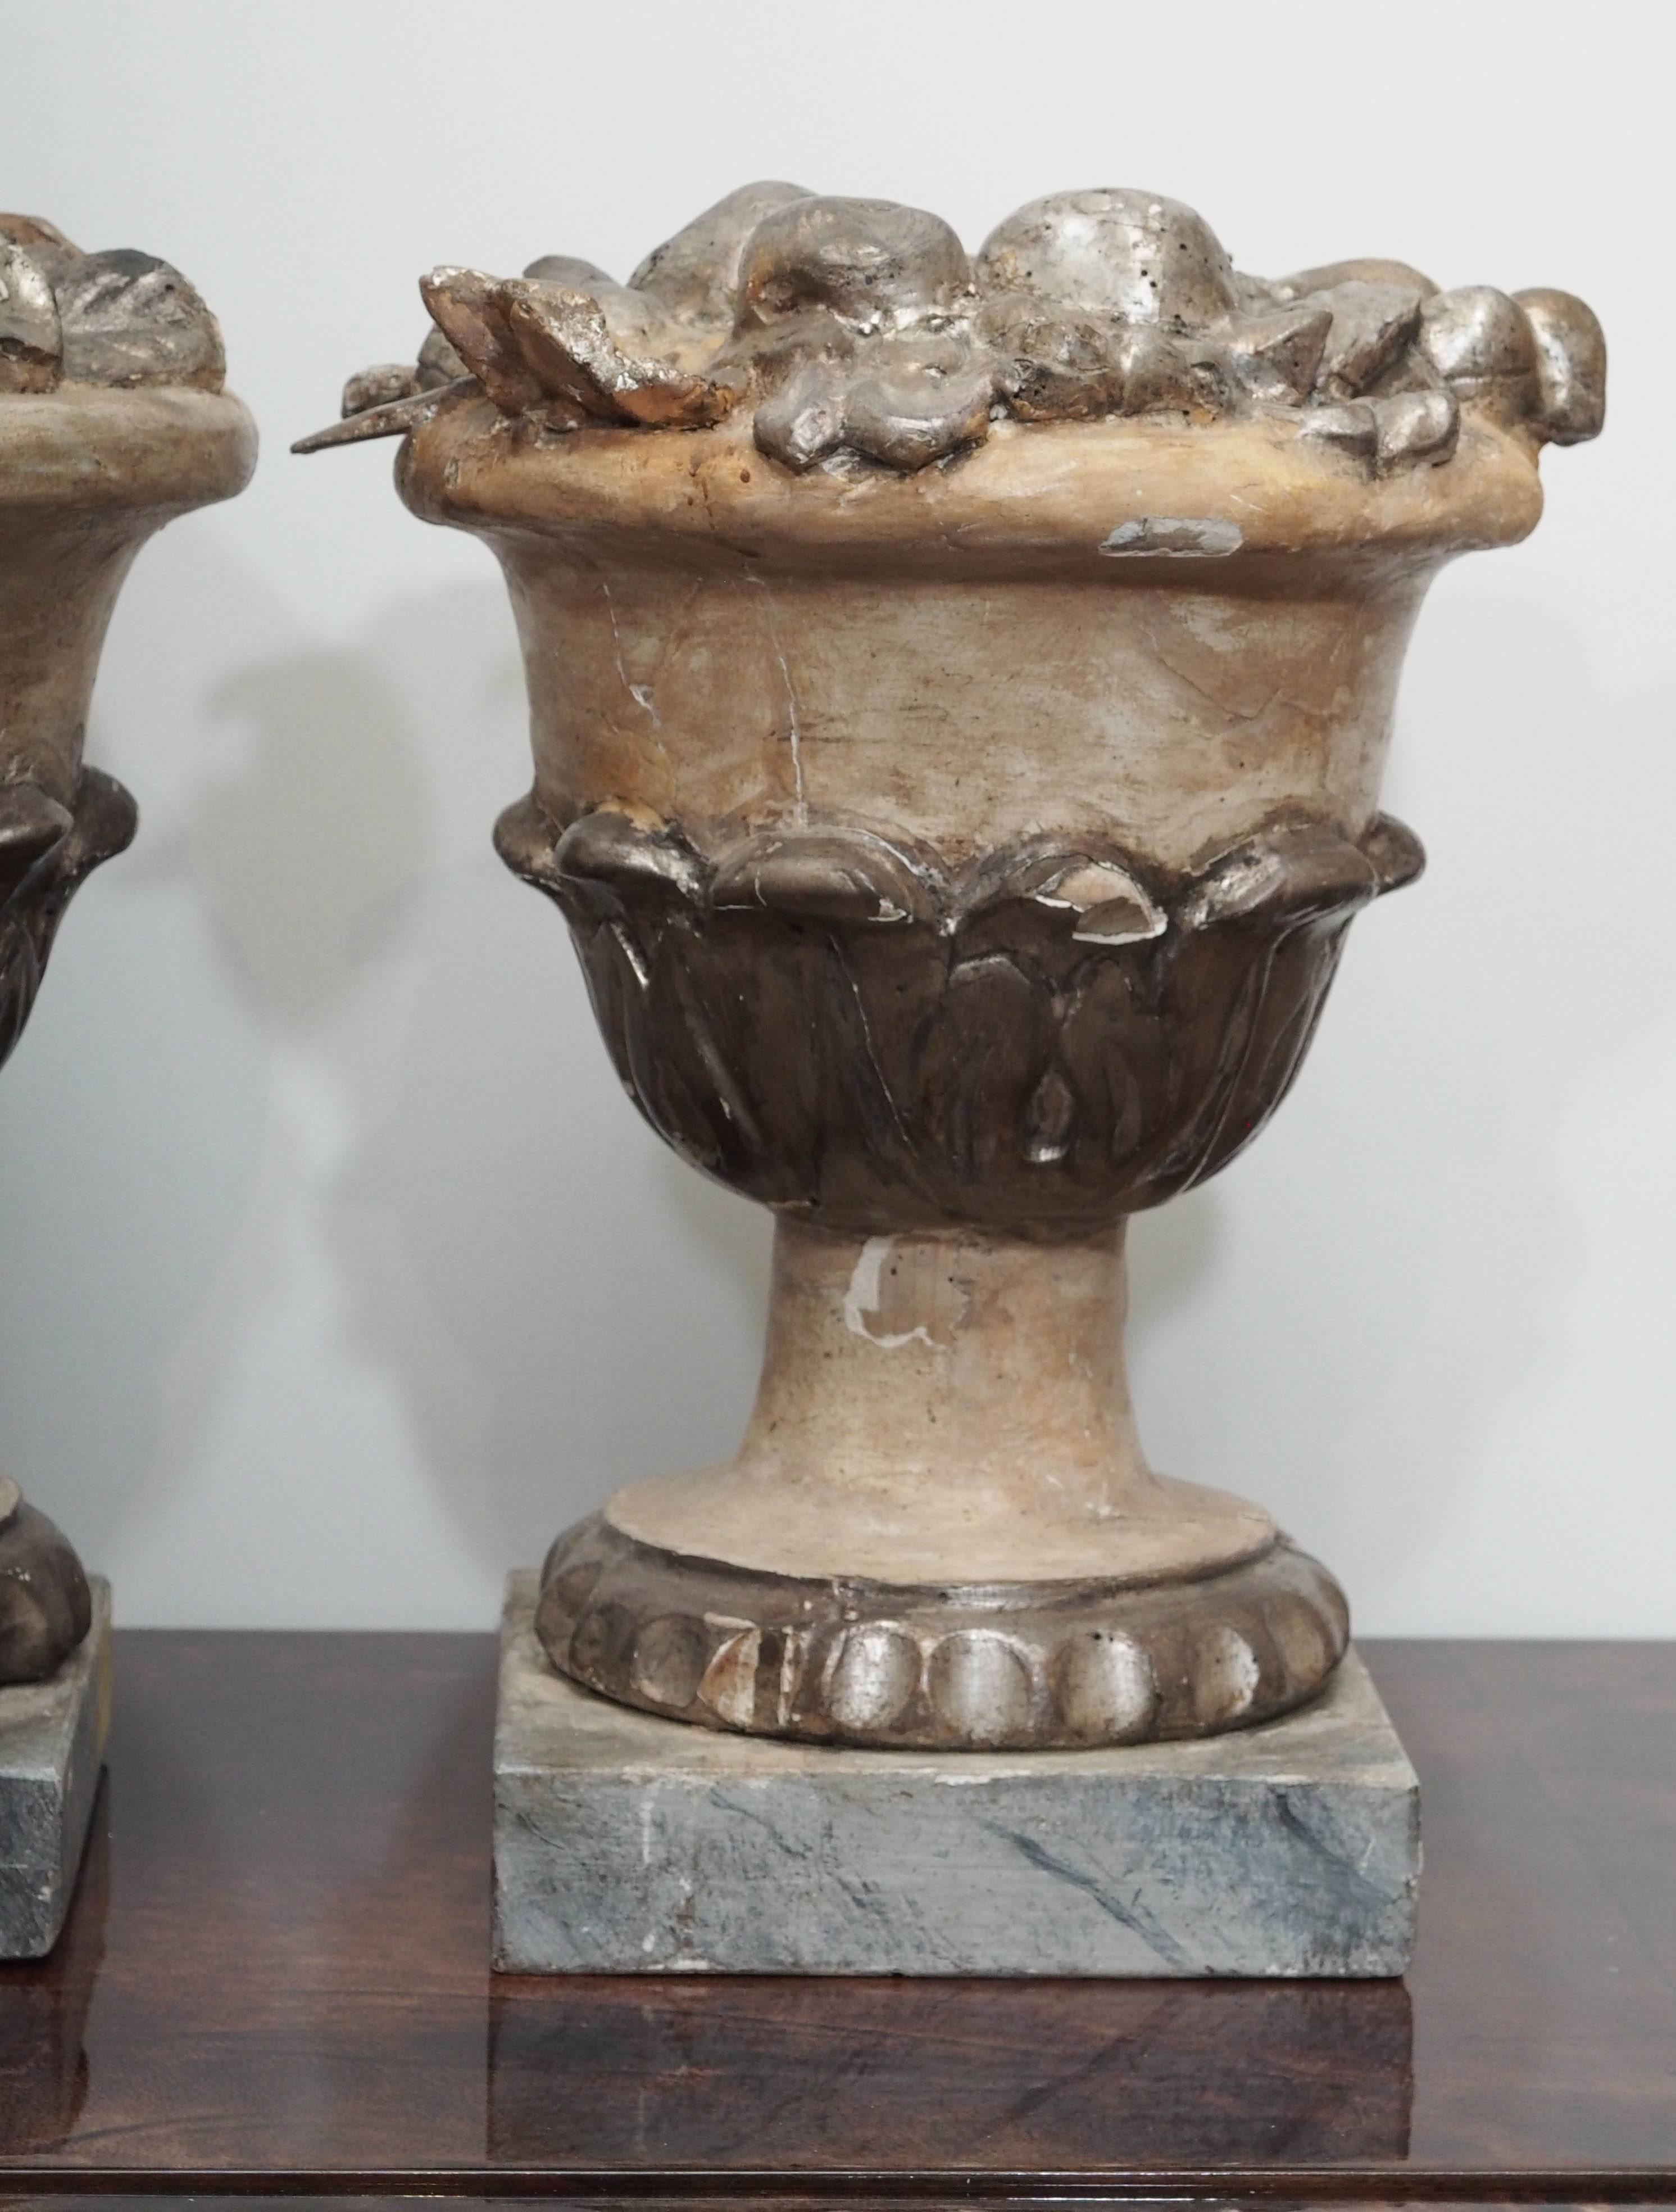 Two carved and silvered Bacchanalian wooden bowls of fruit on wooden pedestals.